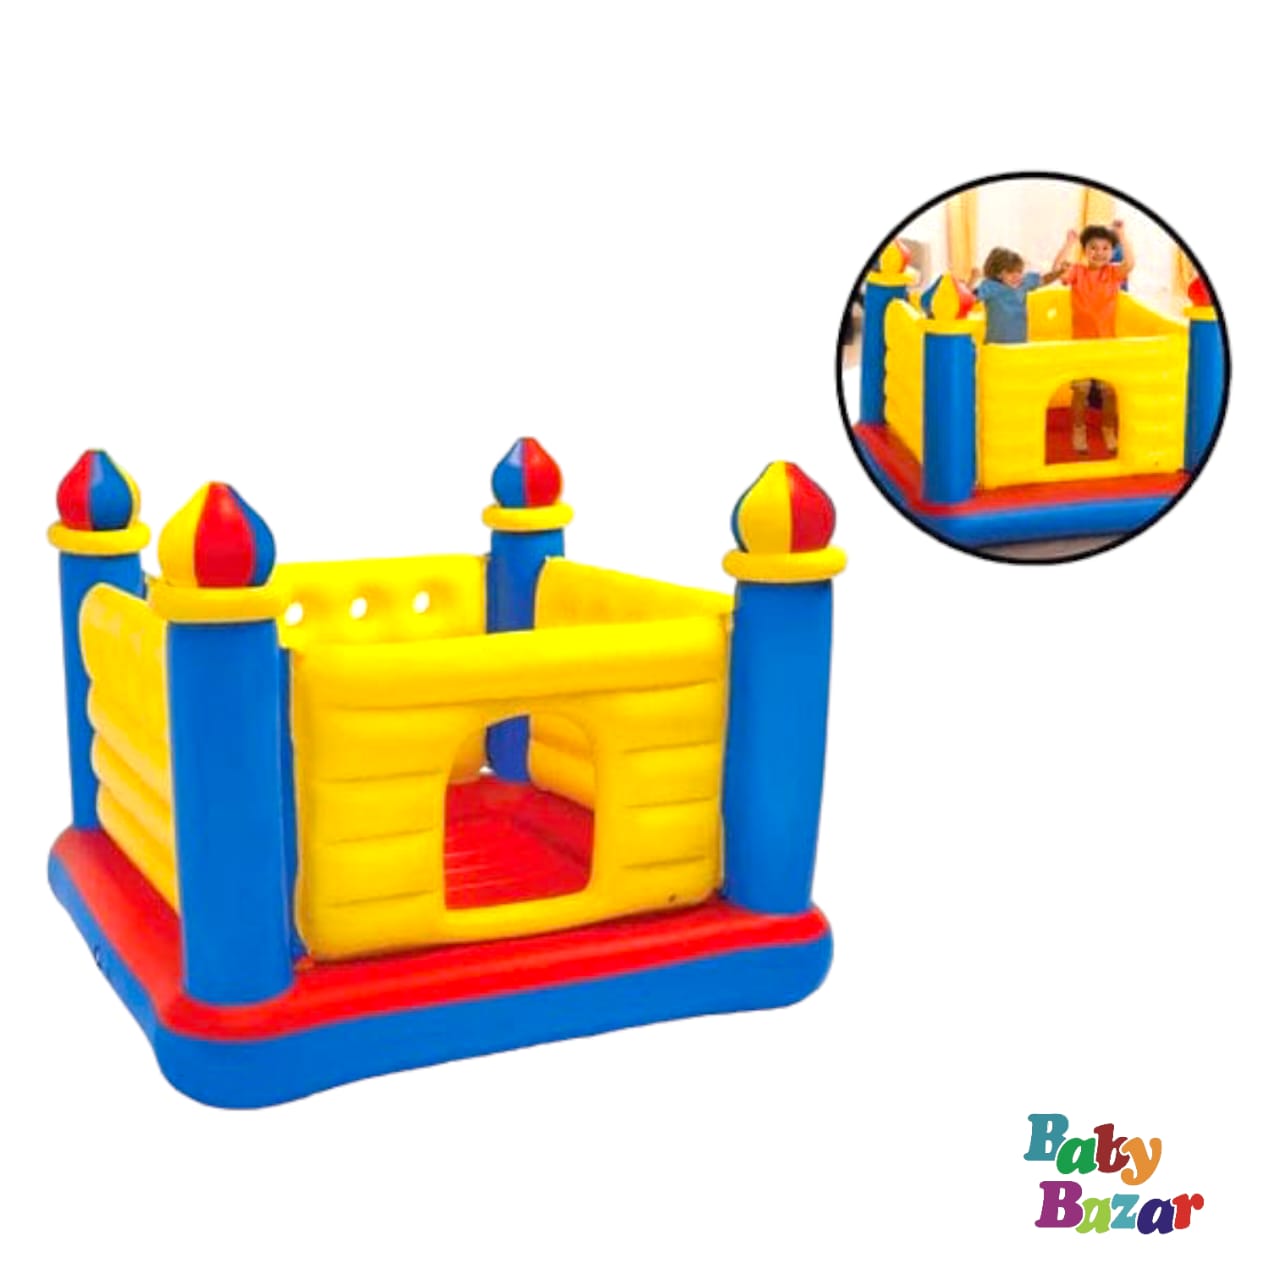 Intex - Jumping Castle Inflatable Bouncer (Complete Deal)